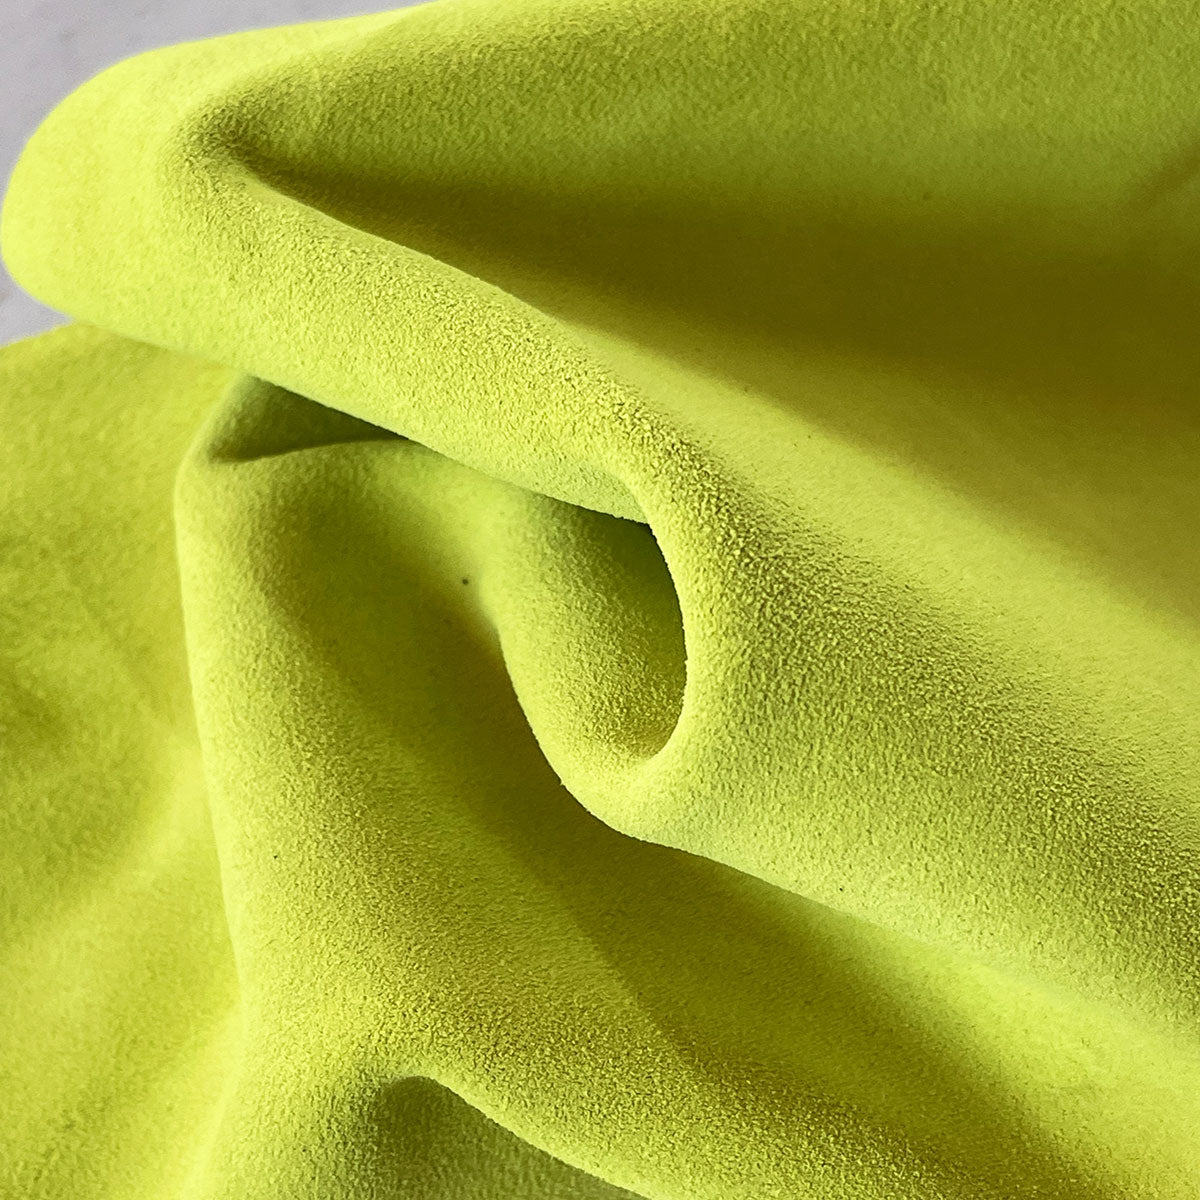 Fluo Yellow Split Suede Leather | Neon Leather | Leathercosmos ...